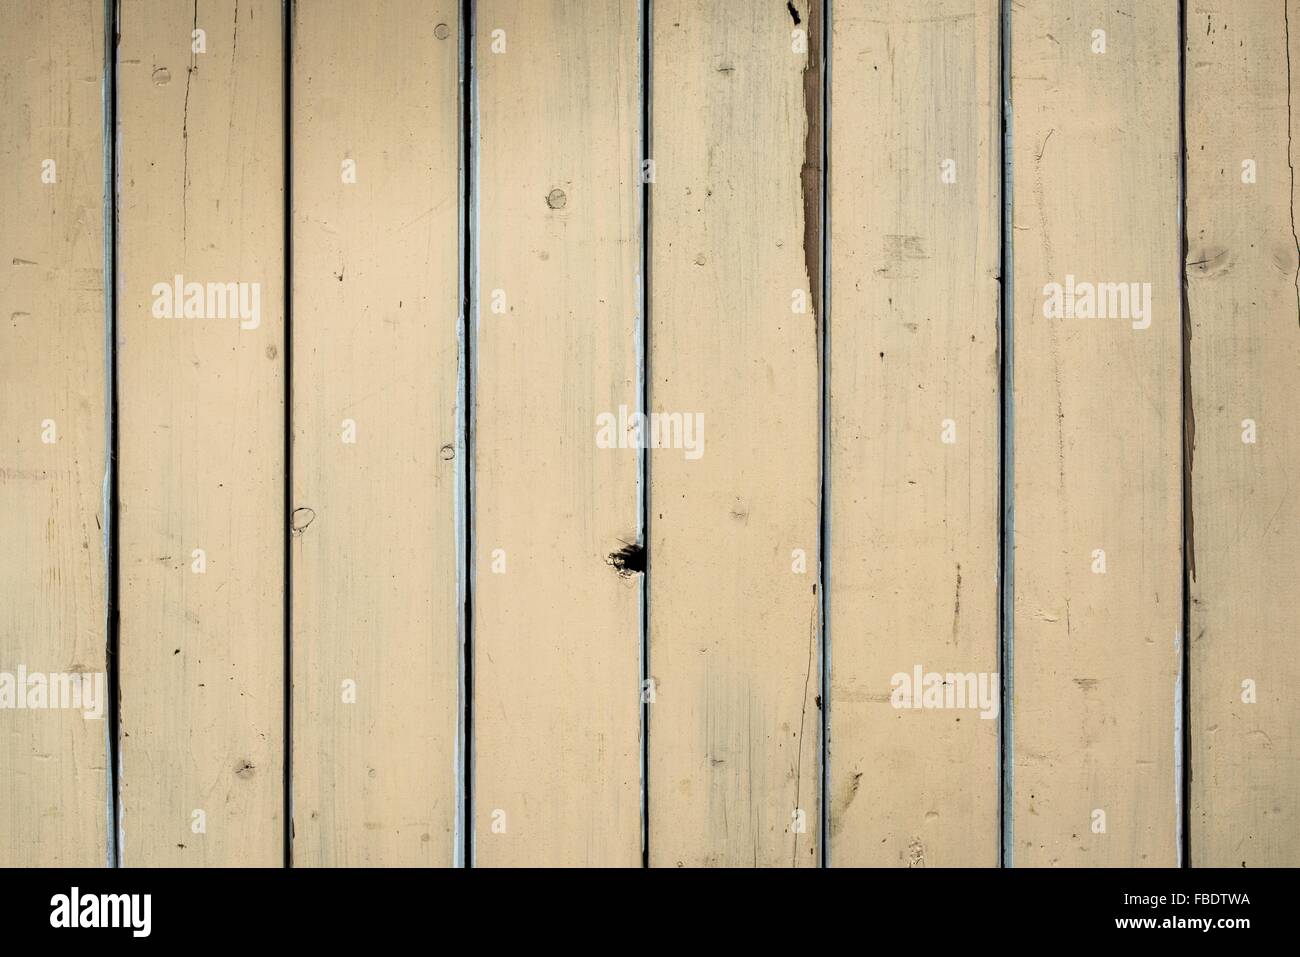 Close-Up Of Wooden Planks Stock Photo